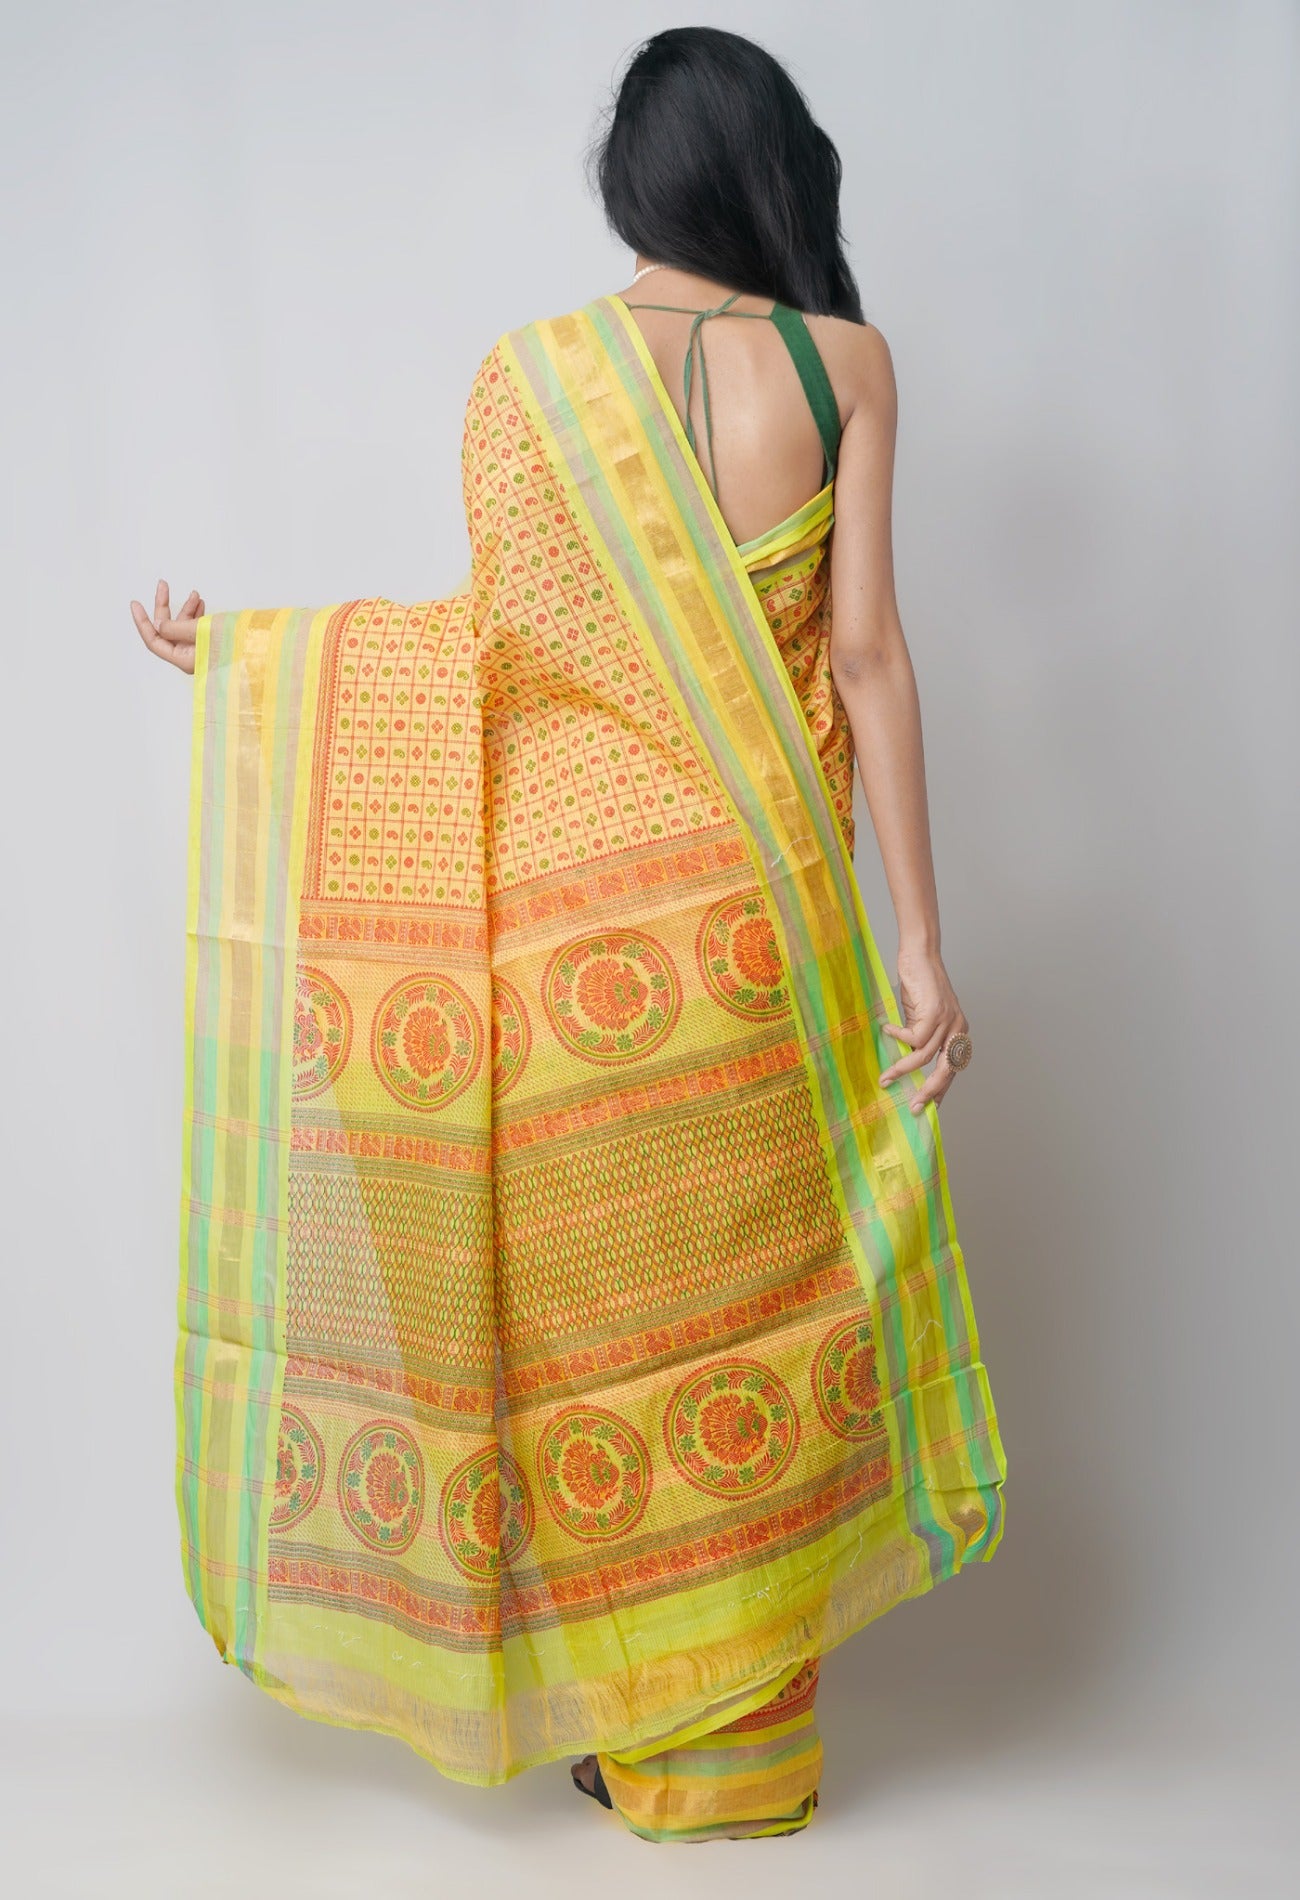 Online Shopping for Yellow Pure Hand Block Printed Cotton Saree with Hand Block Prints from Andhra Pradesh at Unnatisilks.com India
